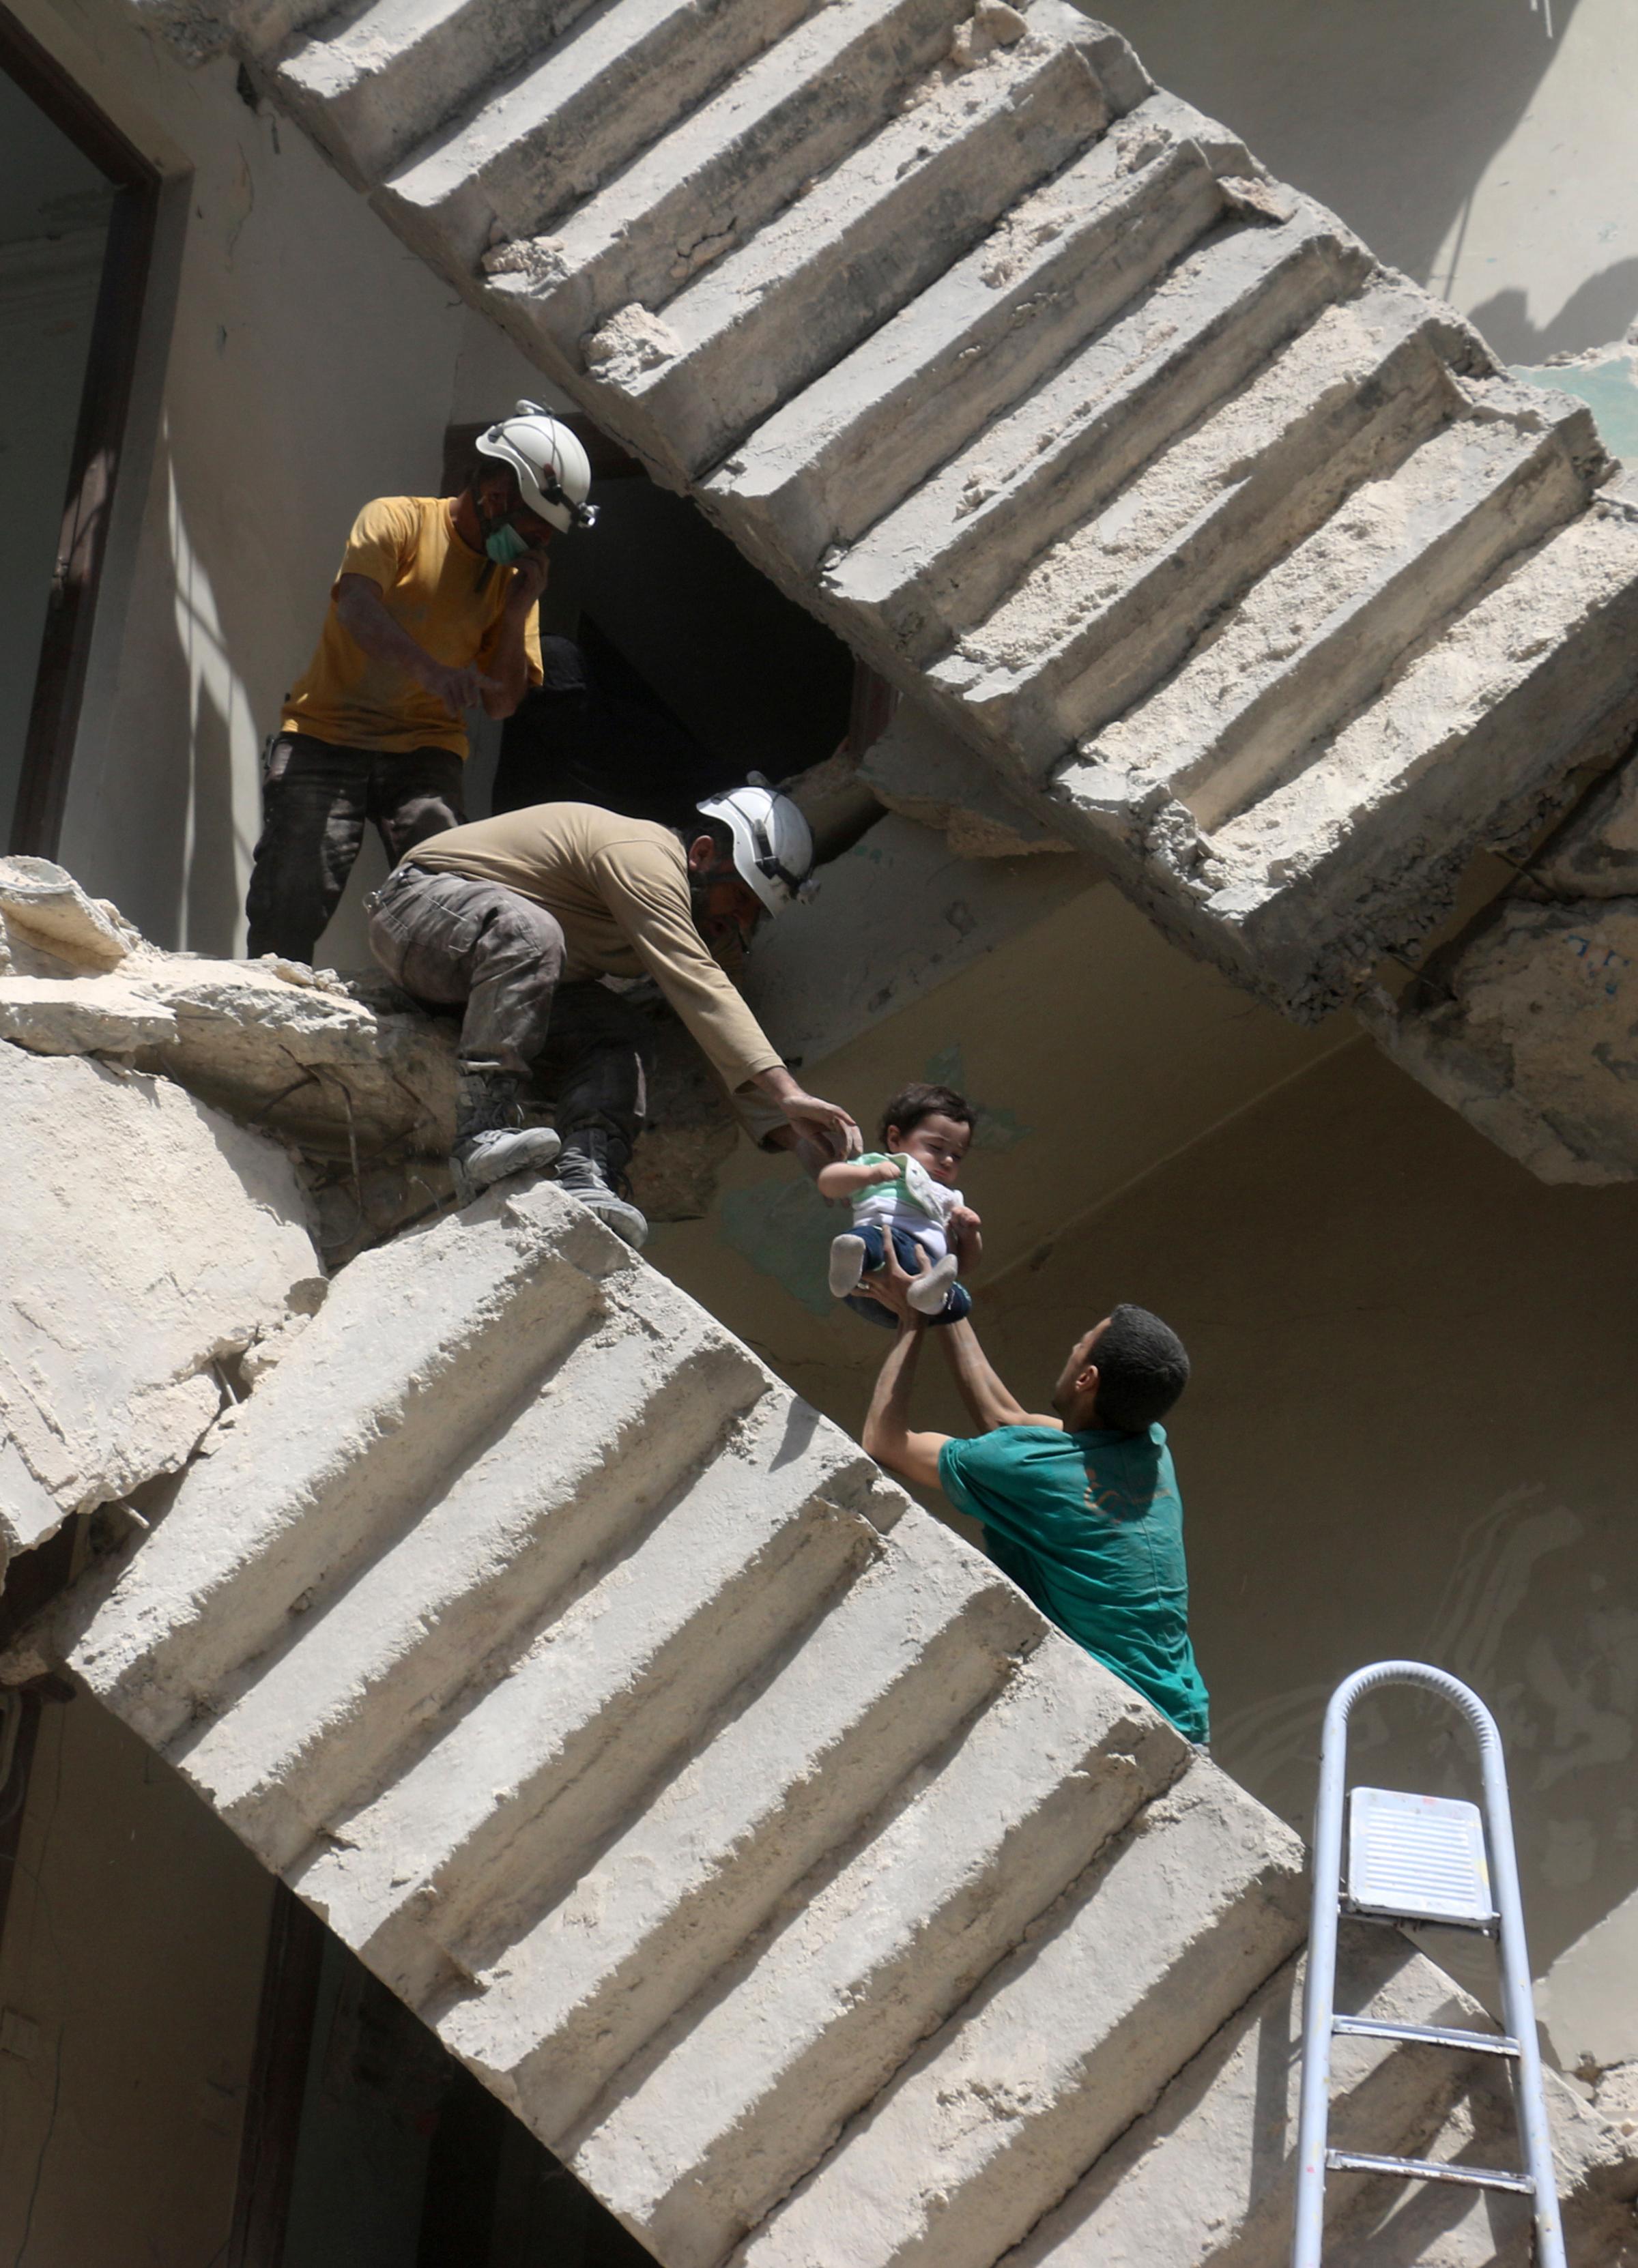 Civil defense volunteers help evacuate a child from a destroyed building following a reported airstrike on a rebel-held neighborhood in Aleppo, Syria, April 28, 2016.